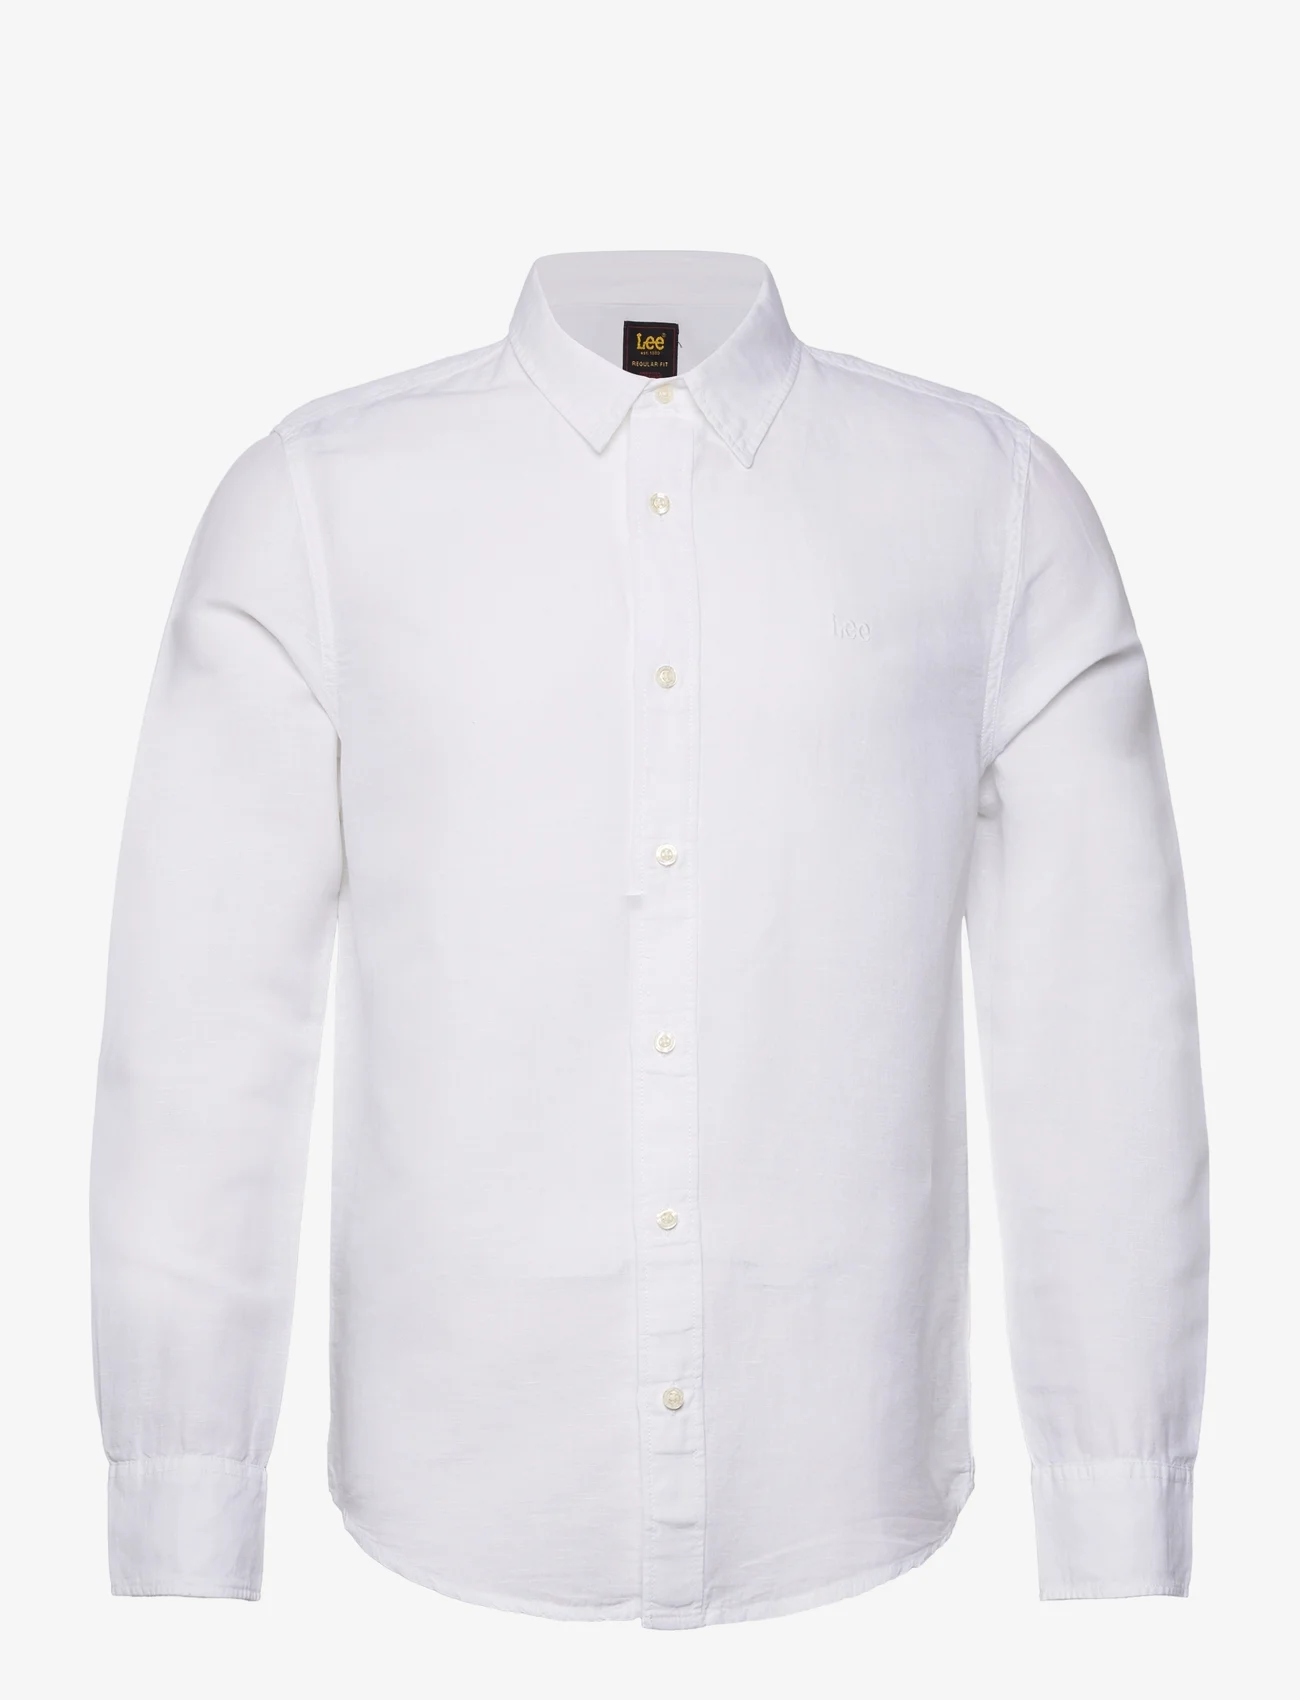 Lee Jeans - PATCH SHIRT - linen shirts - bright white - 0